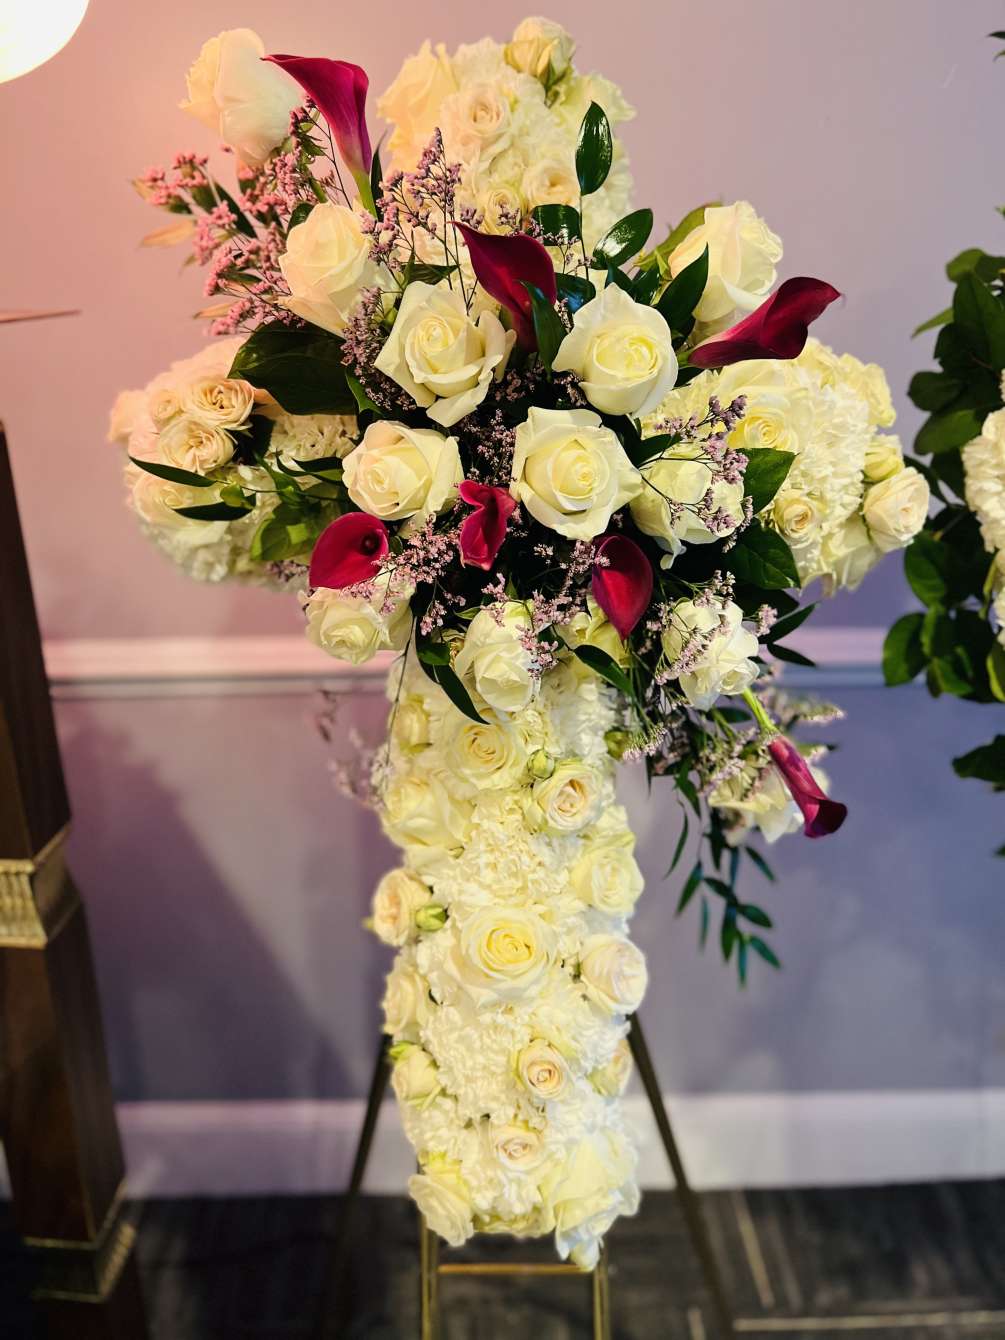 24 inch Cross with Cream roses, Carnations, Red Calla lilies and Greens